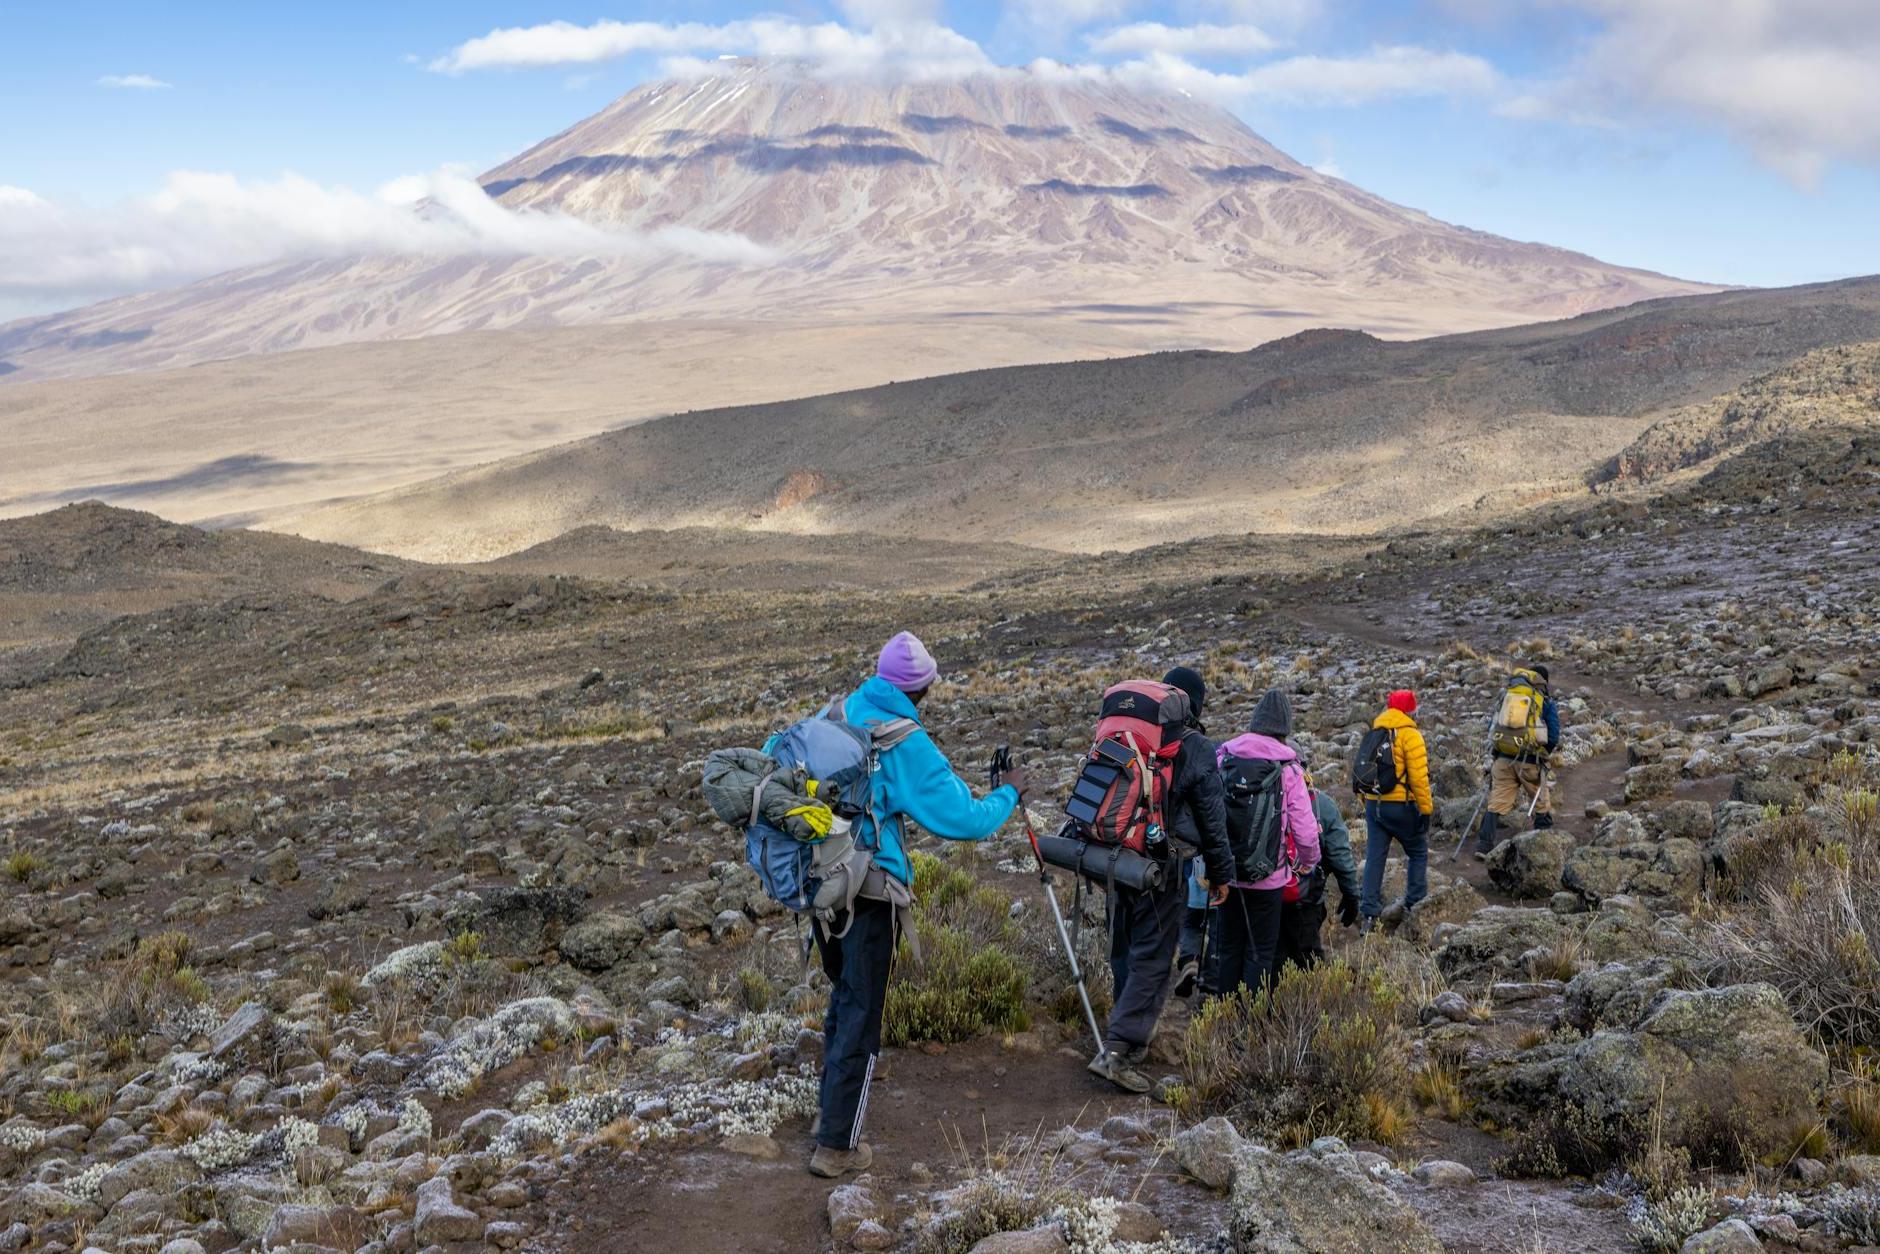 People in a Travel on the Mount Kilimanjaro